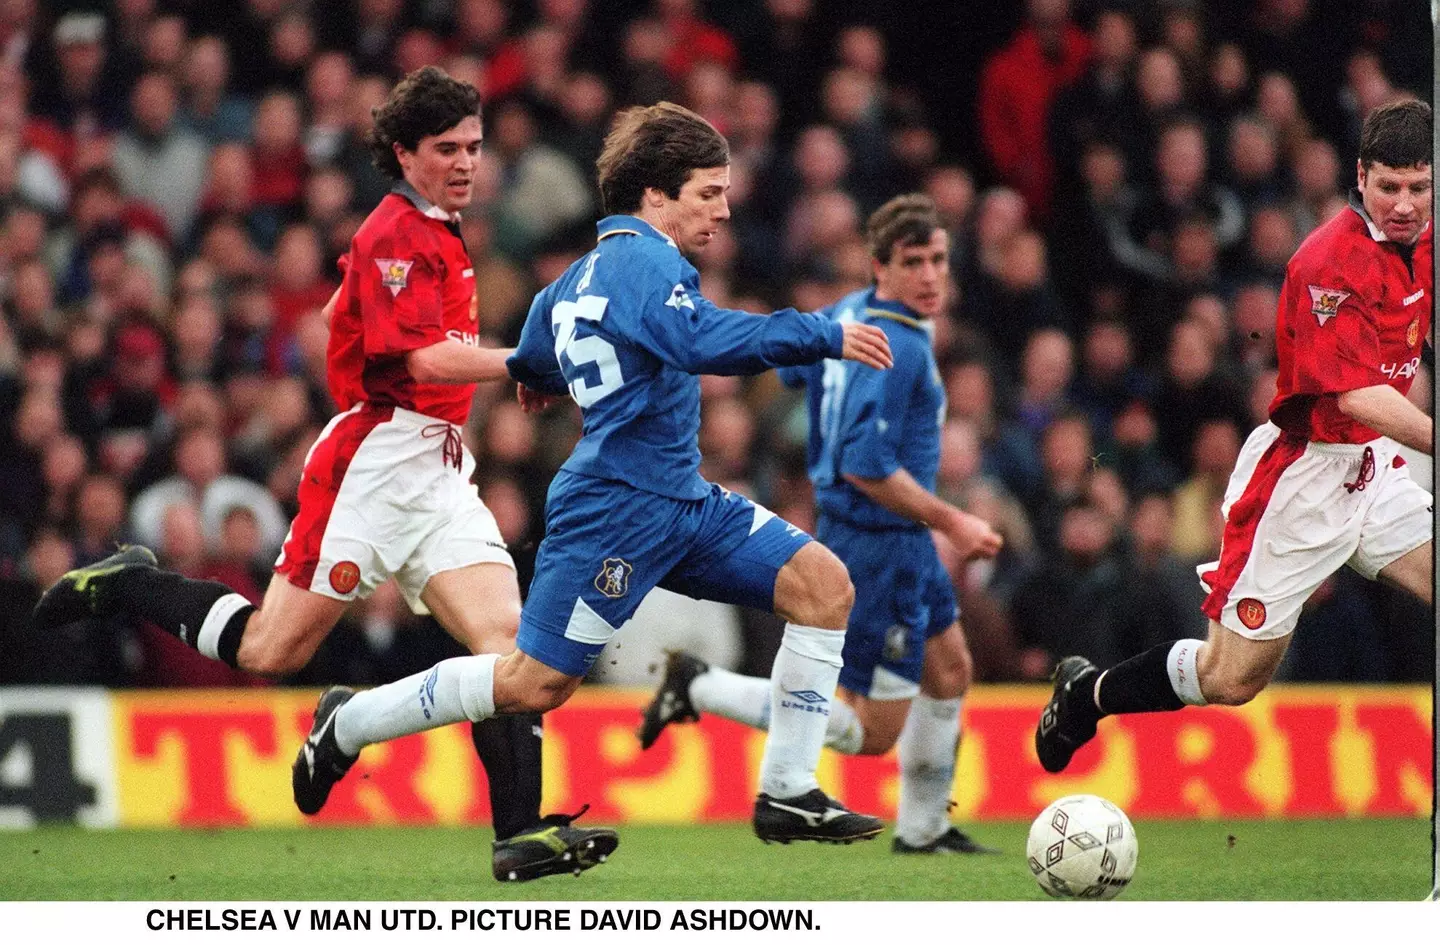 Gianfranco Zola in action for Chelsea against Manchester United. Image: Alamy